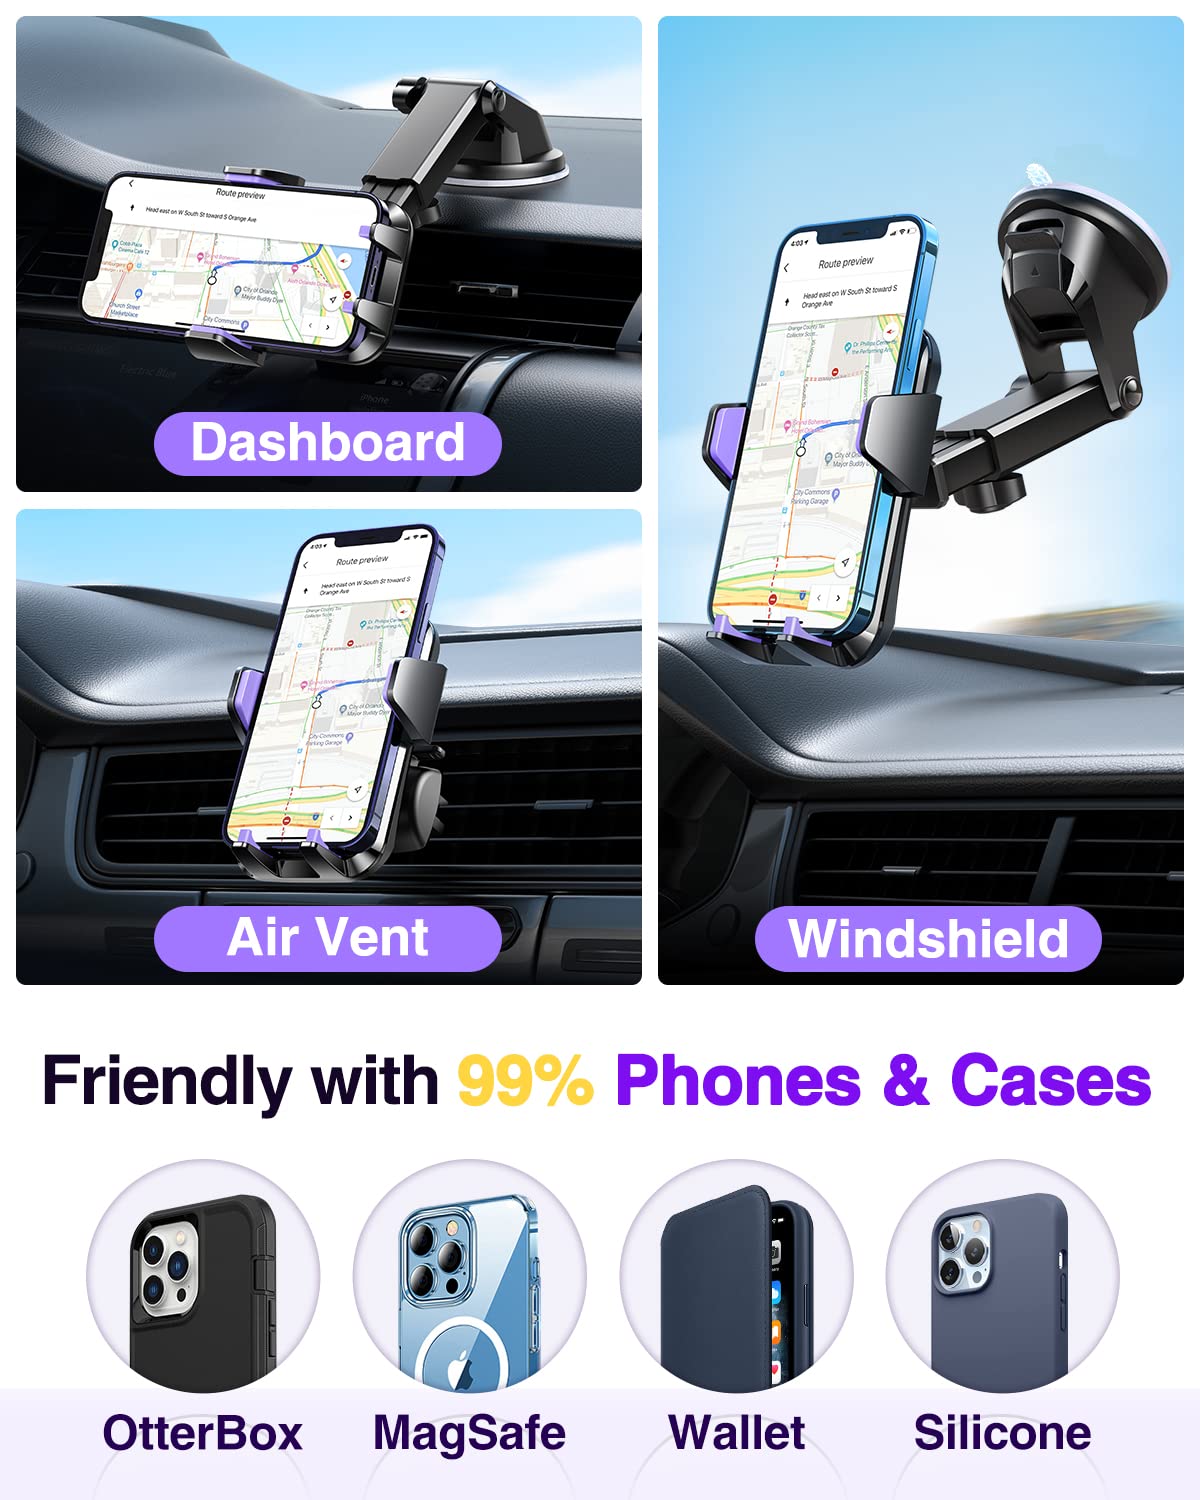 VANMASS Universal Car Phone Mount,【Patent & Safety Certs】 Upgraded Handsfree Dashboard Stand, Phone Holder for Car Windshield Vent, Compatible iPhone 14 13 12 11 Pro Max Xs XR X, Galaxy (Purple)